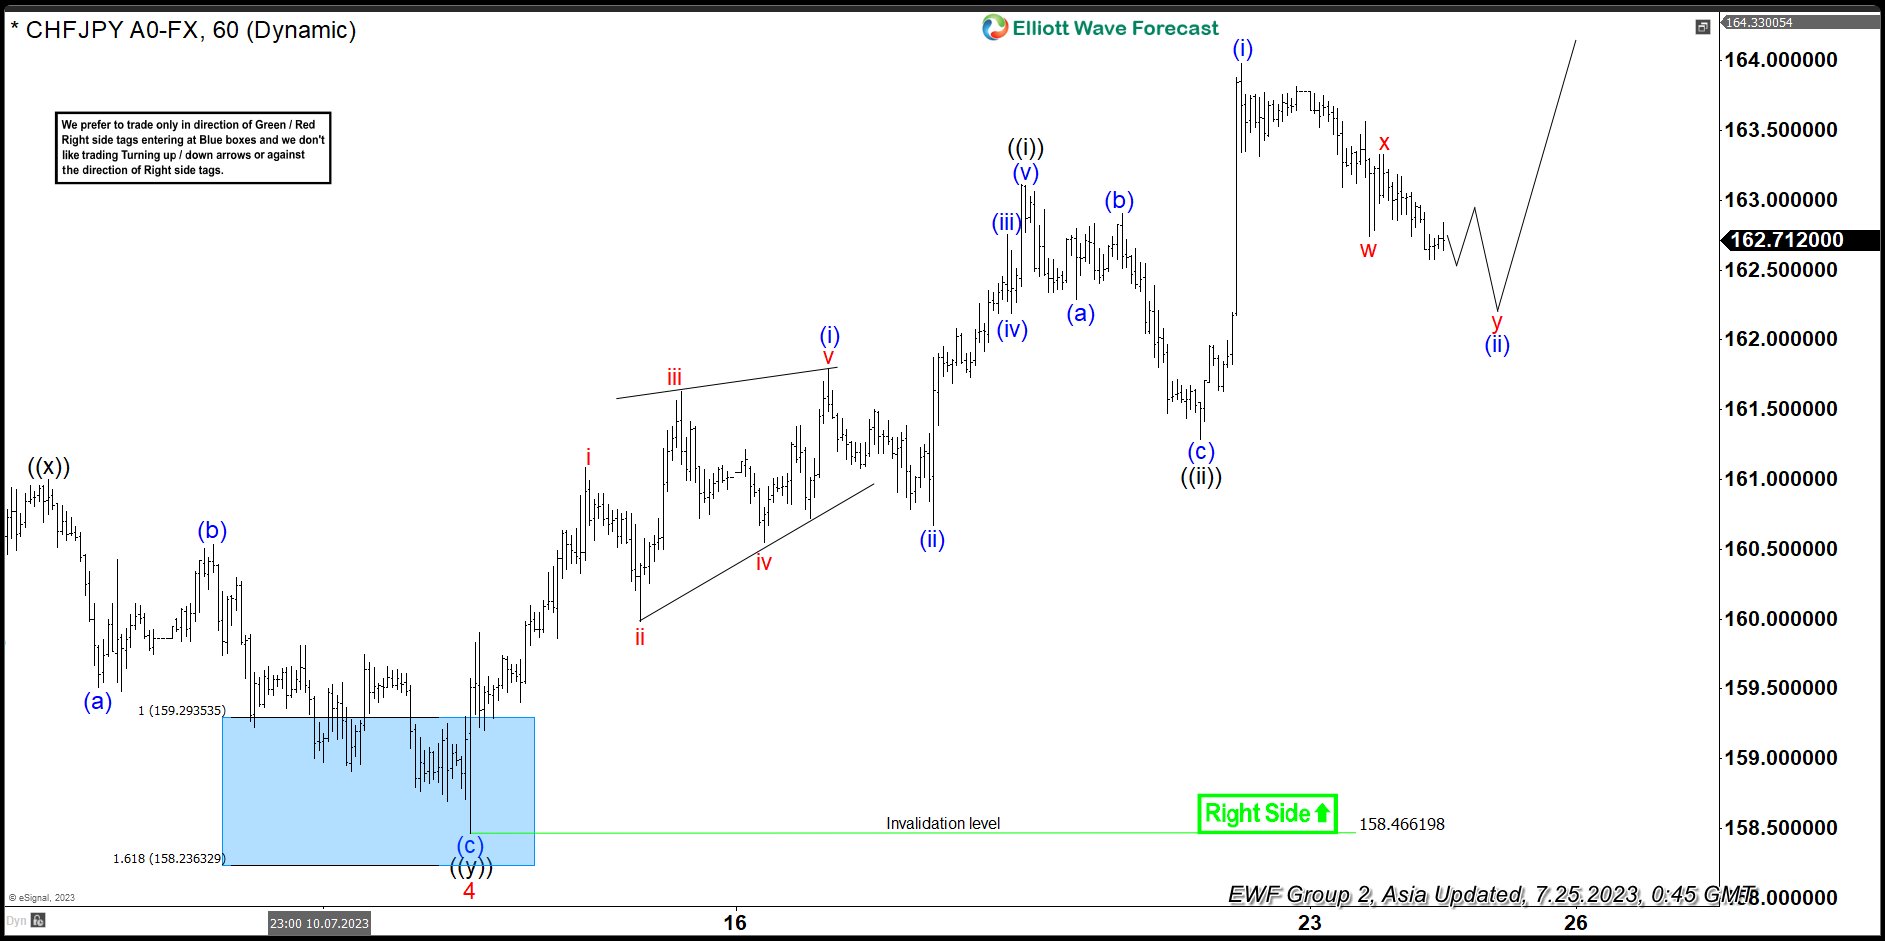 CHFJPY Strong Rally From The Elliott Wave Blue Box Area